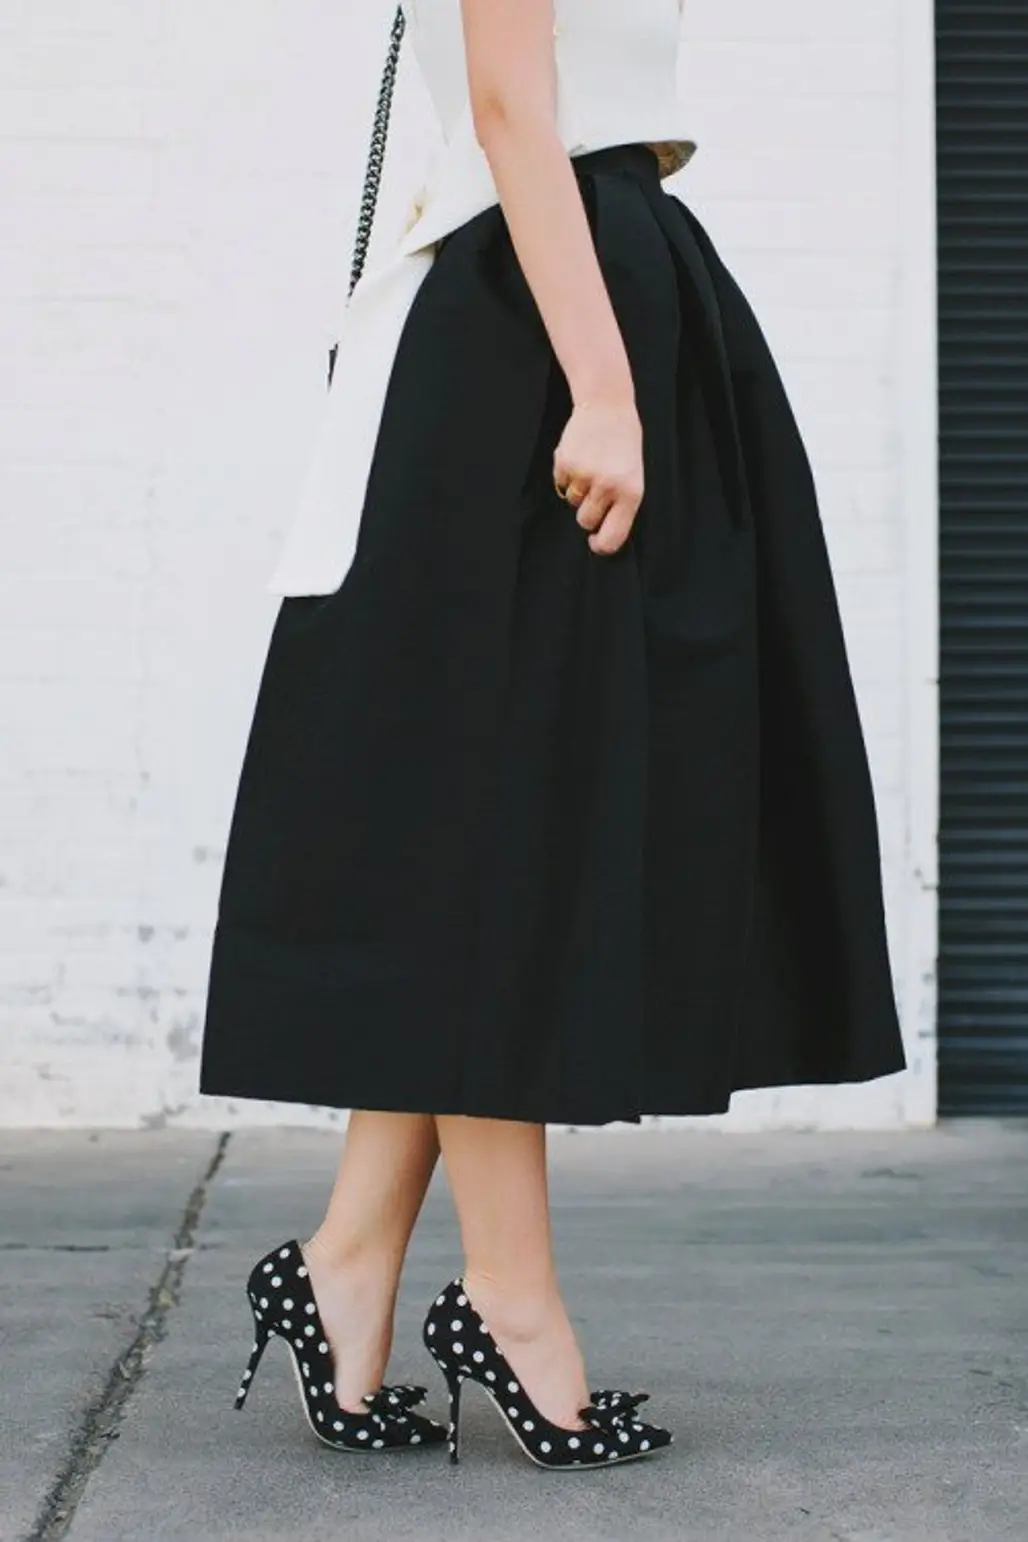 Midi Skirts Are a Classic